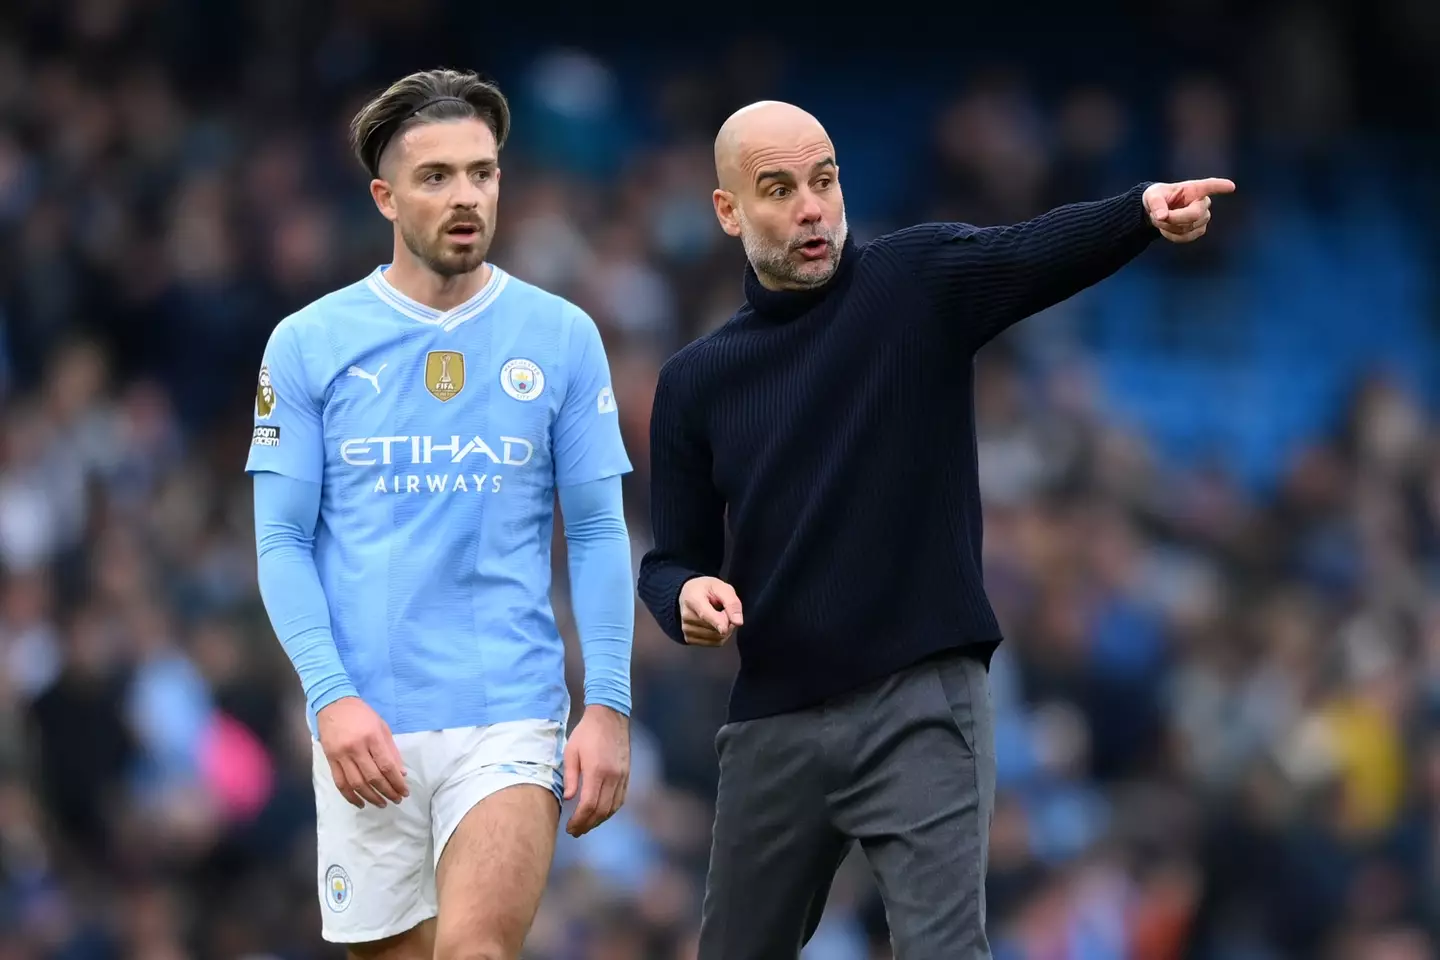 Guardiola appeared frustrated at Grealish's performance vs Arsenal (Getty)